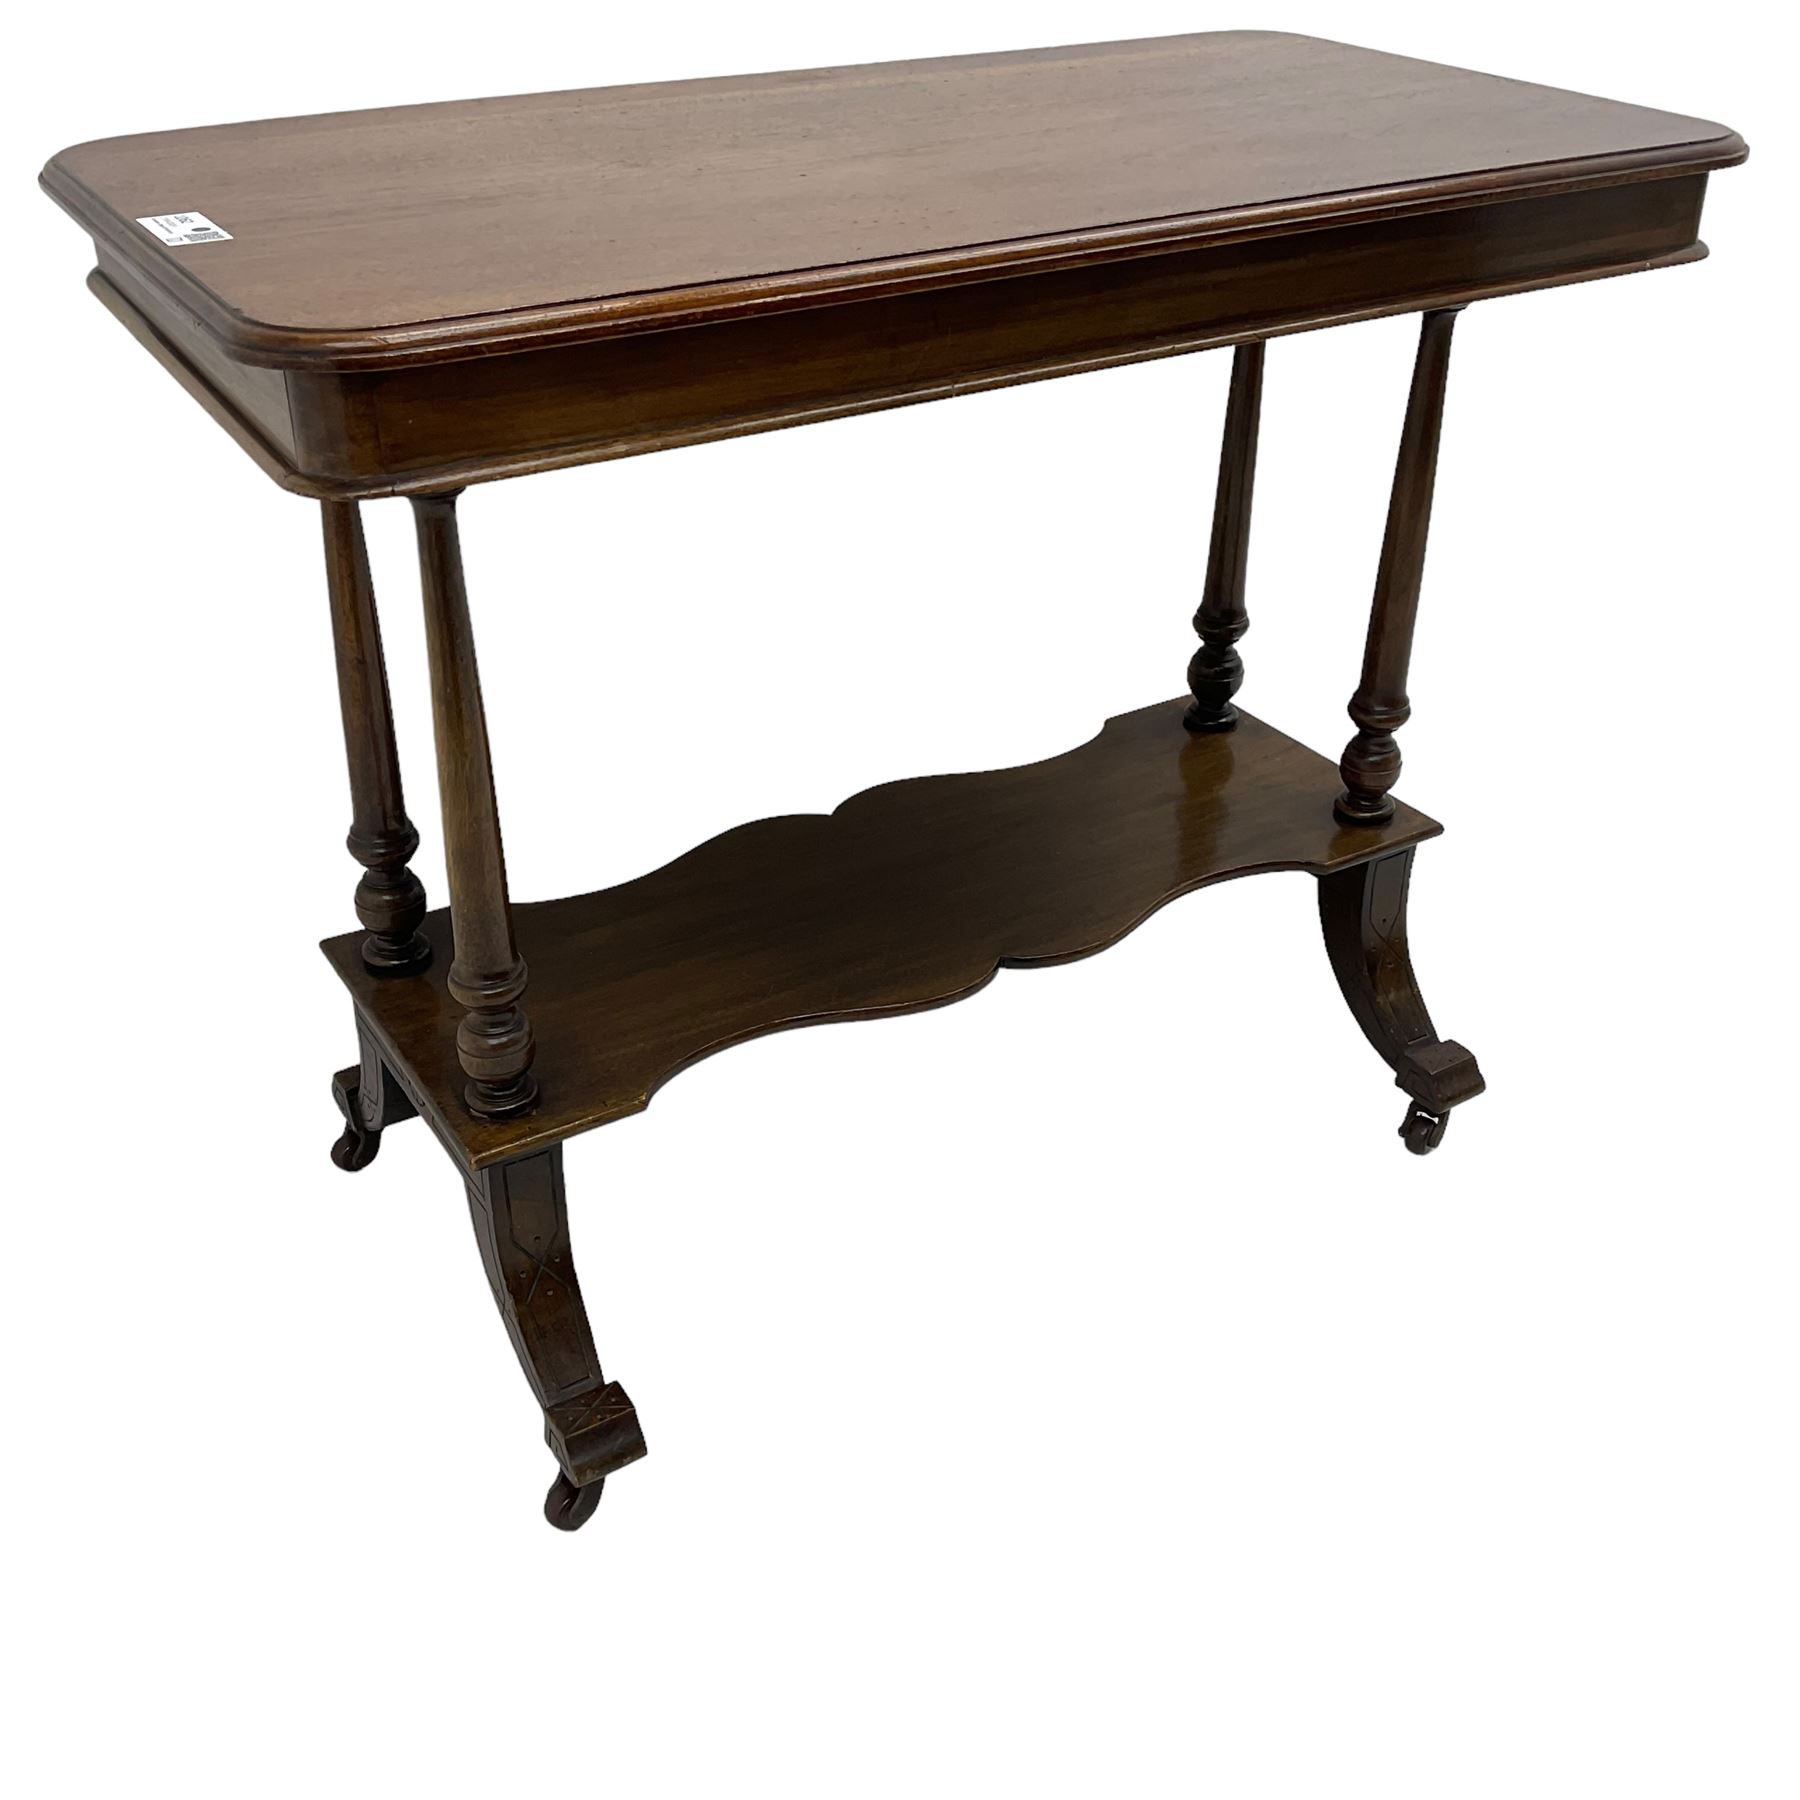 Late Victorian mahogany Aesthetic movement side table - Image 5 of 8